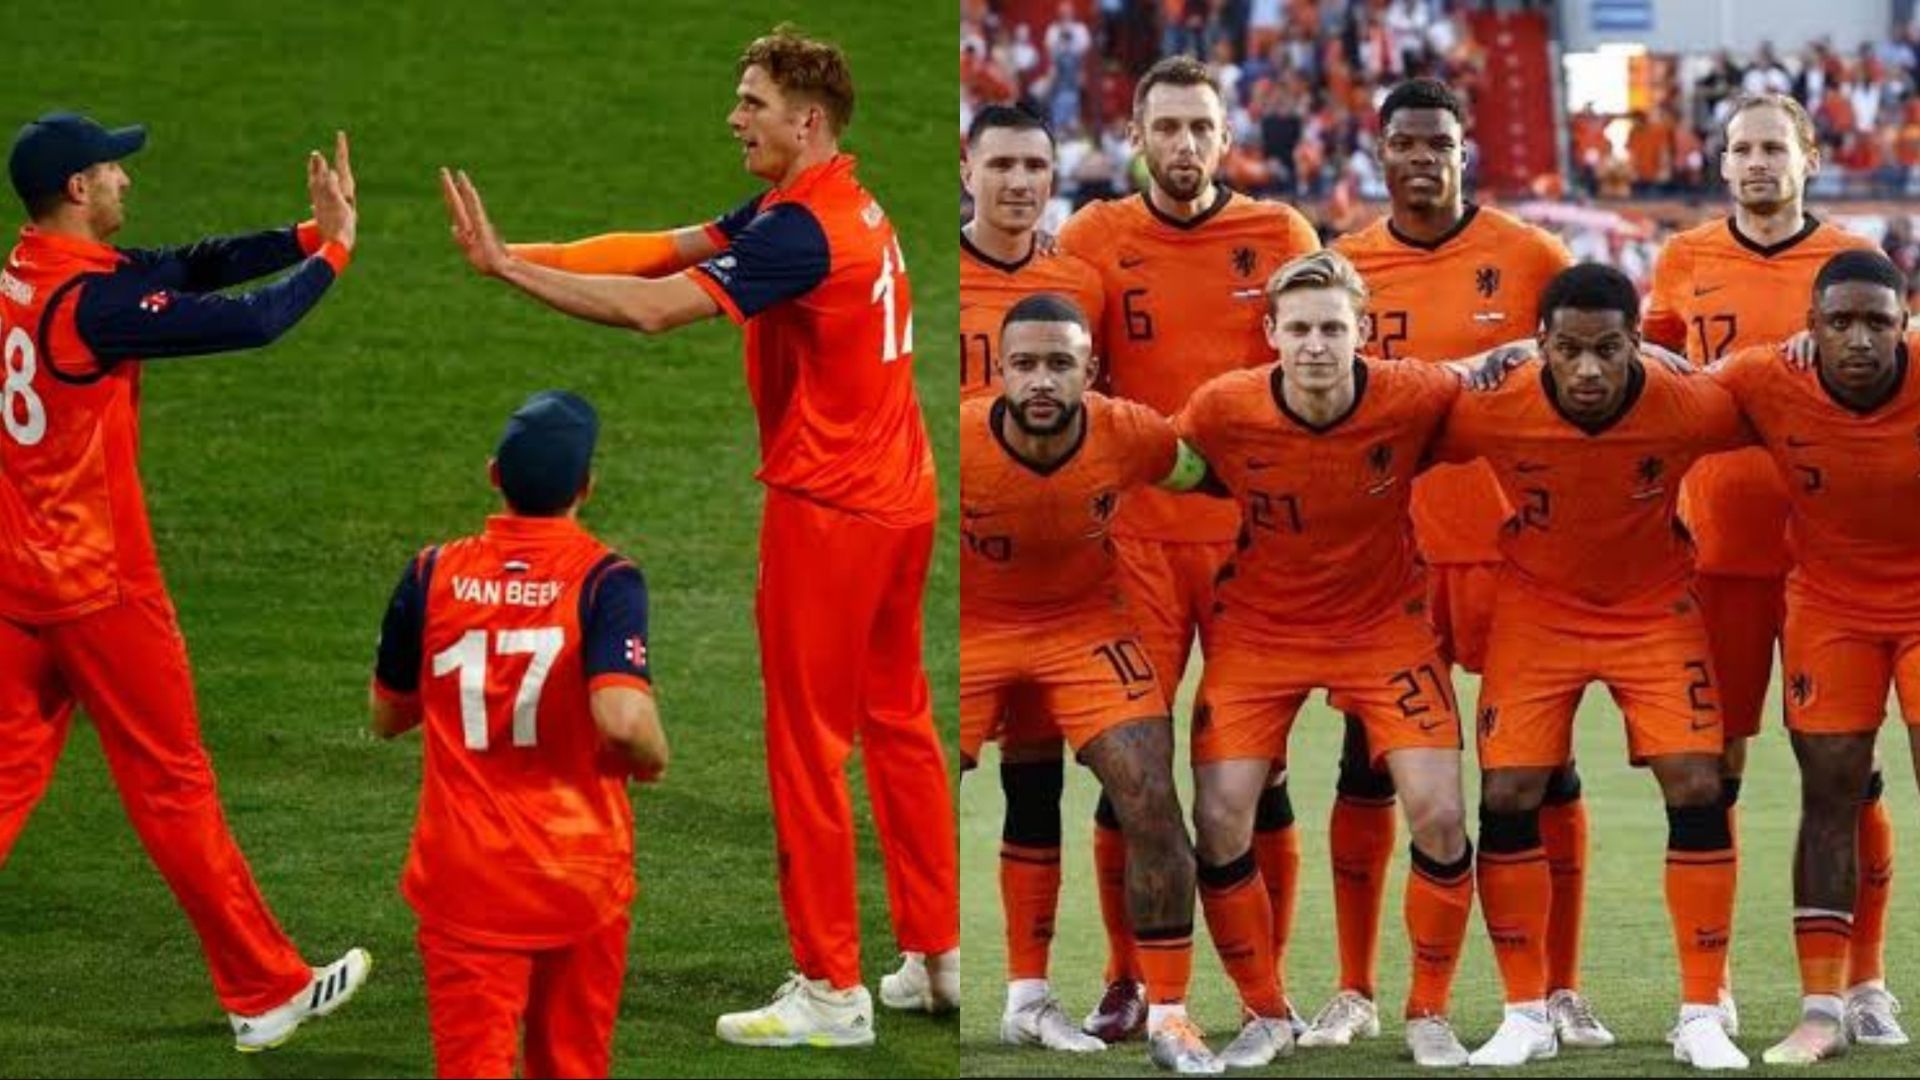 The Netherlands made it to both the World Cups 